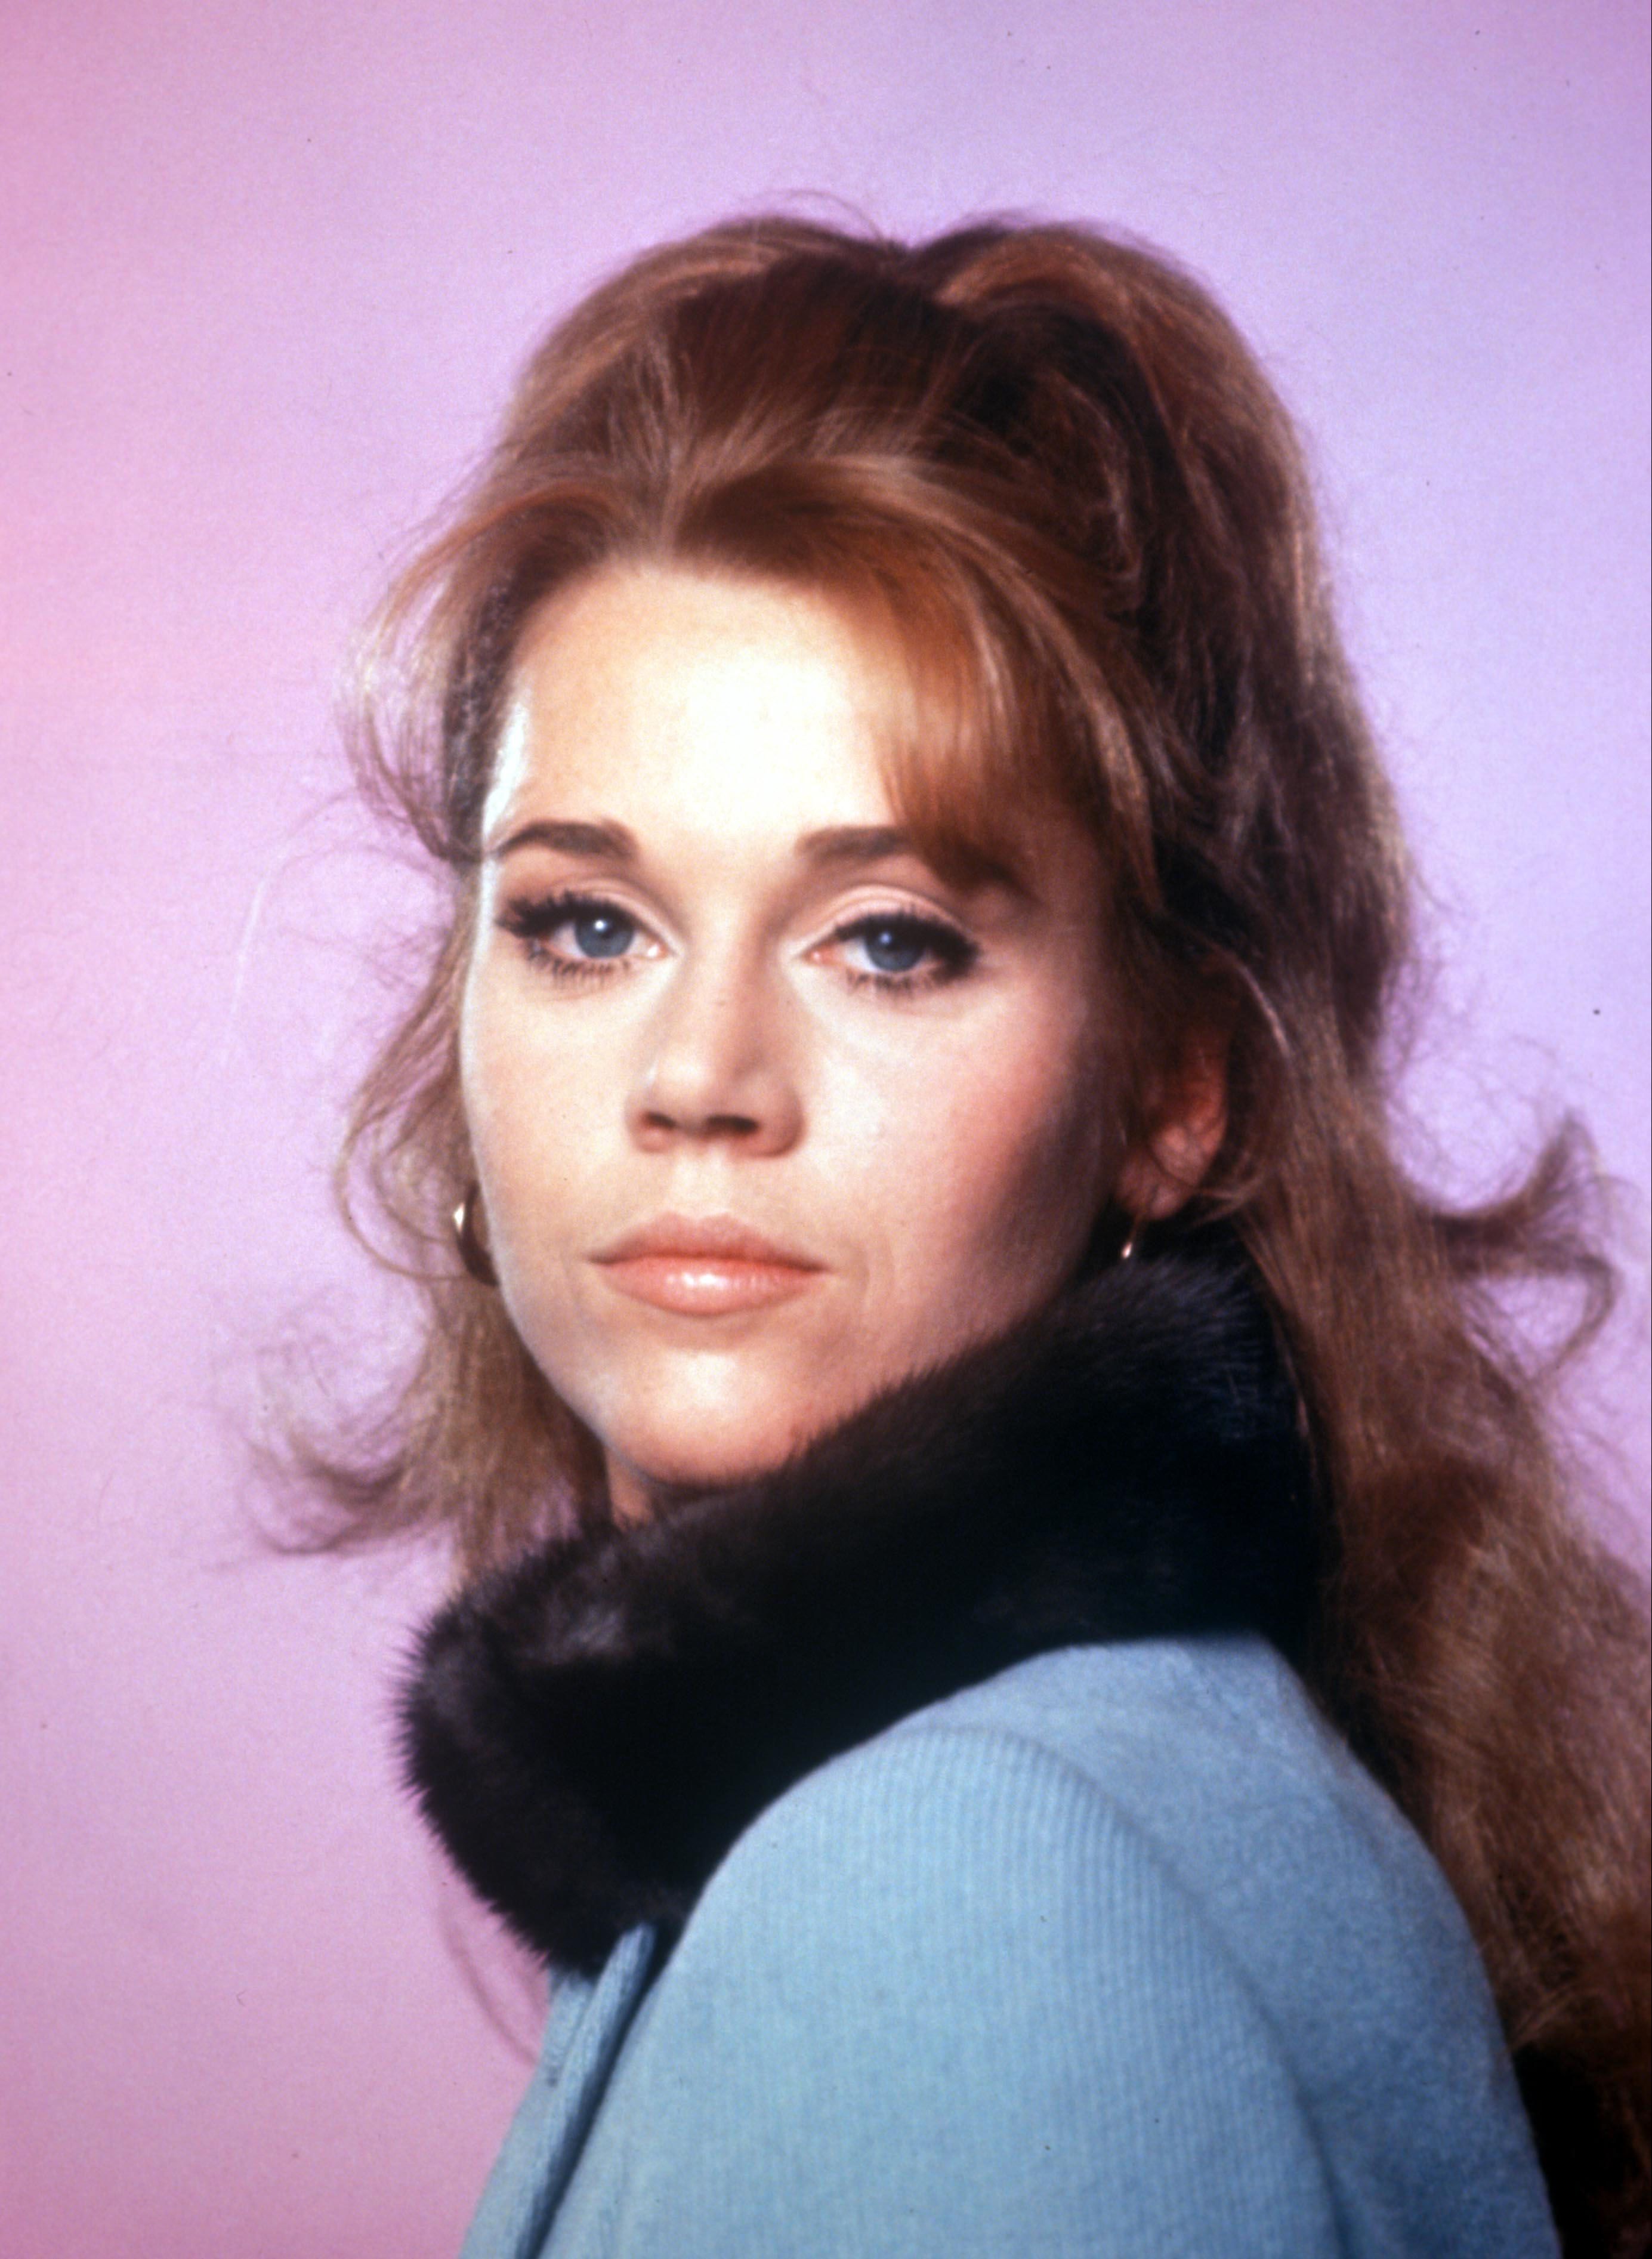 Jane Fonda as a young woman with reddish brown hair in the 60s. | Source: Getty Images